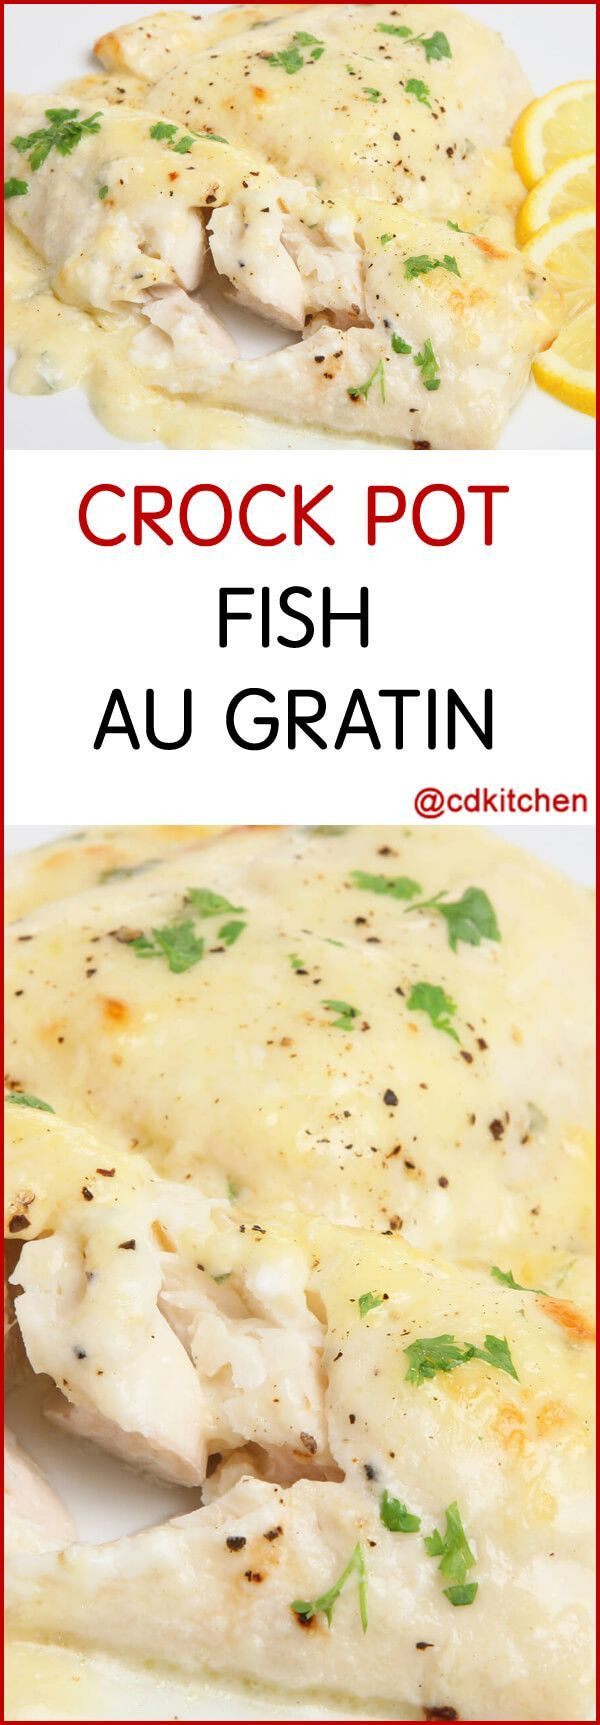 Crockpot Fish Recipes
 Slow Cooker Fish Au Gratin You can use any white fish in